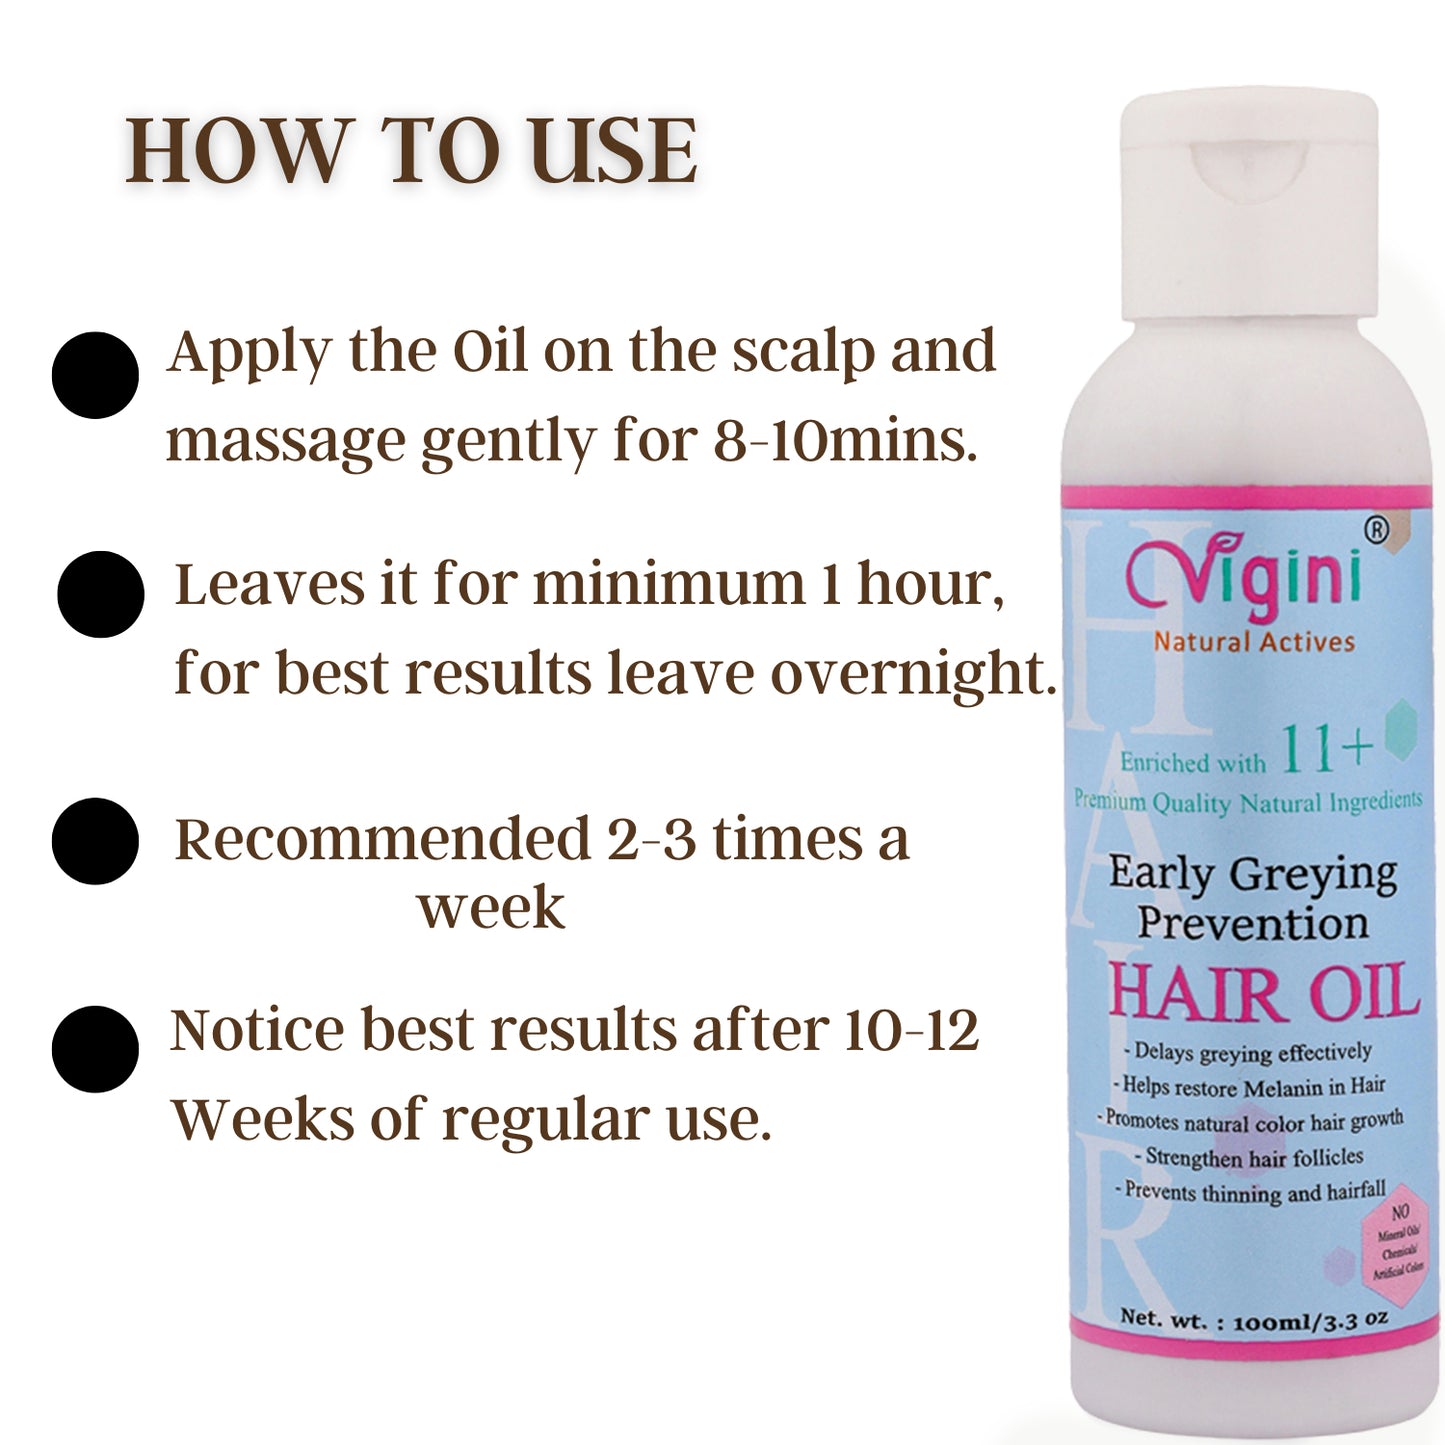 Early Greying Prevention Hair Oil